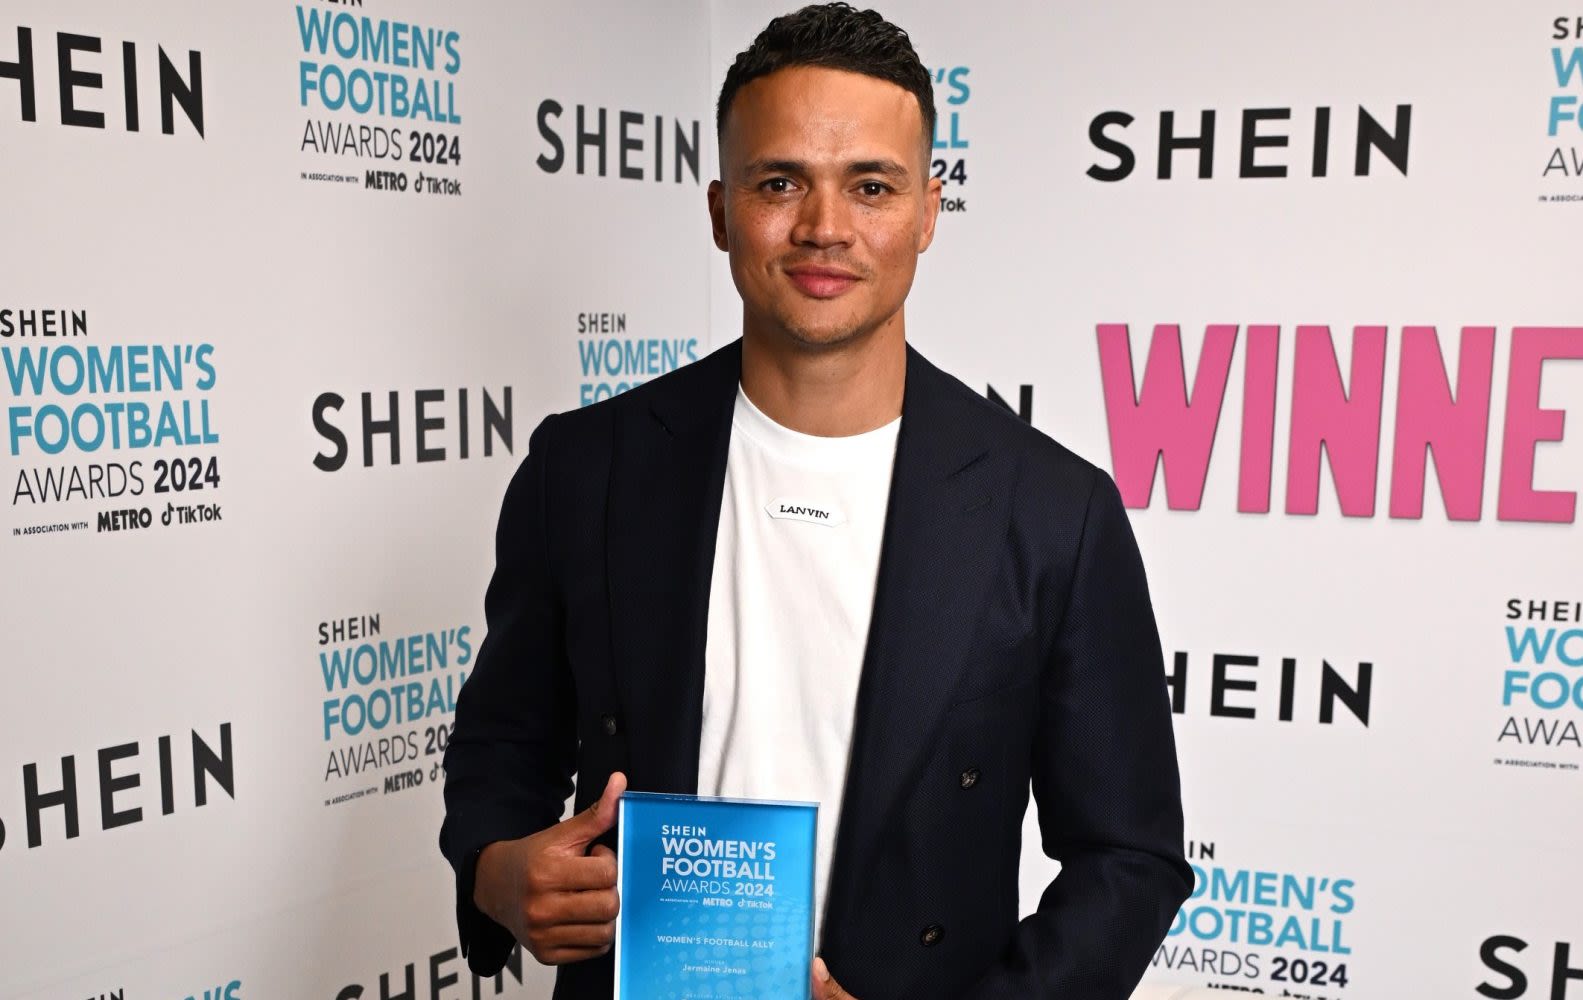 If Jermaine Jenas is the ‘Women’s Football Ally Of The Year’ then it is time to scrap the award